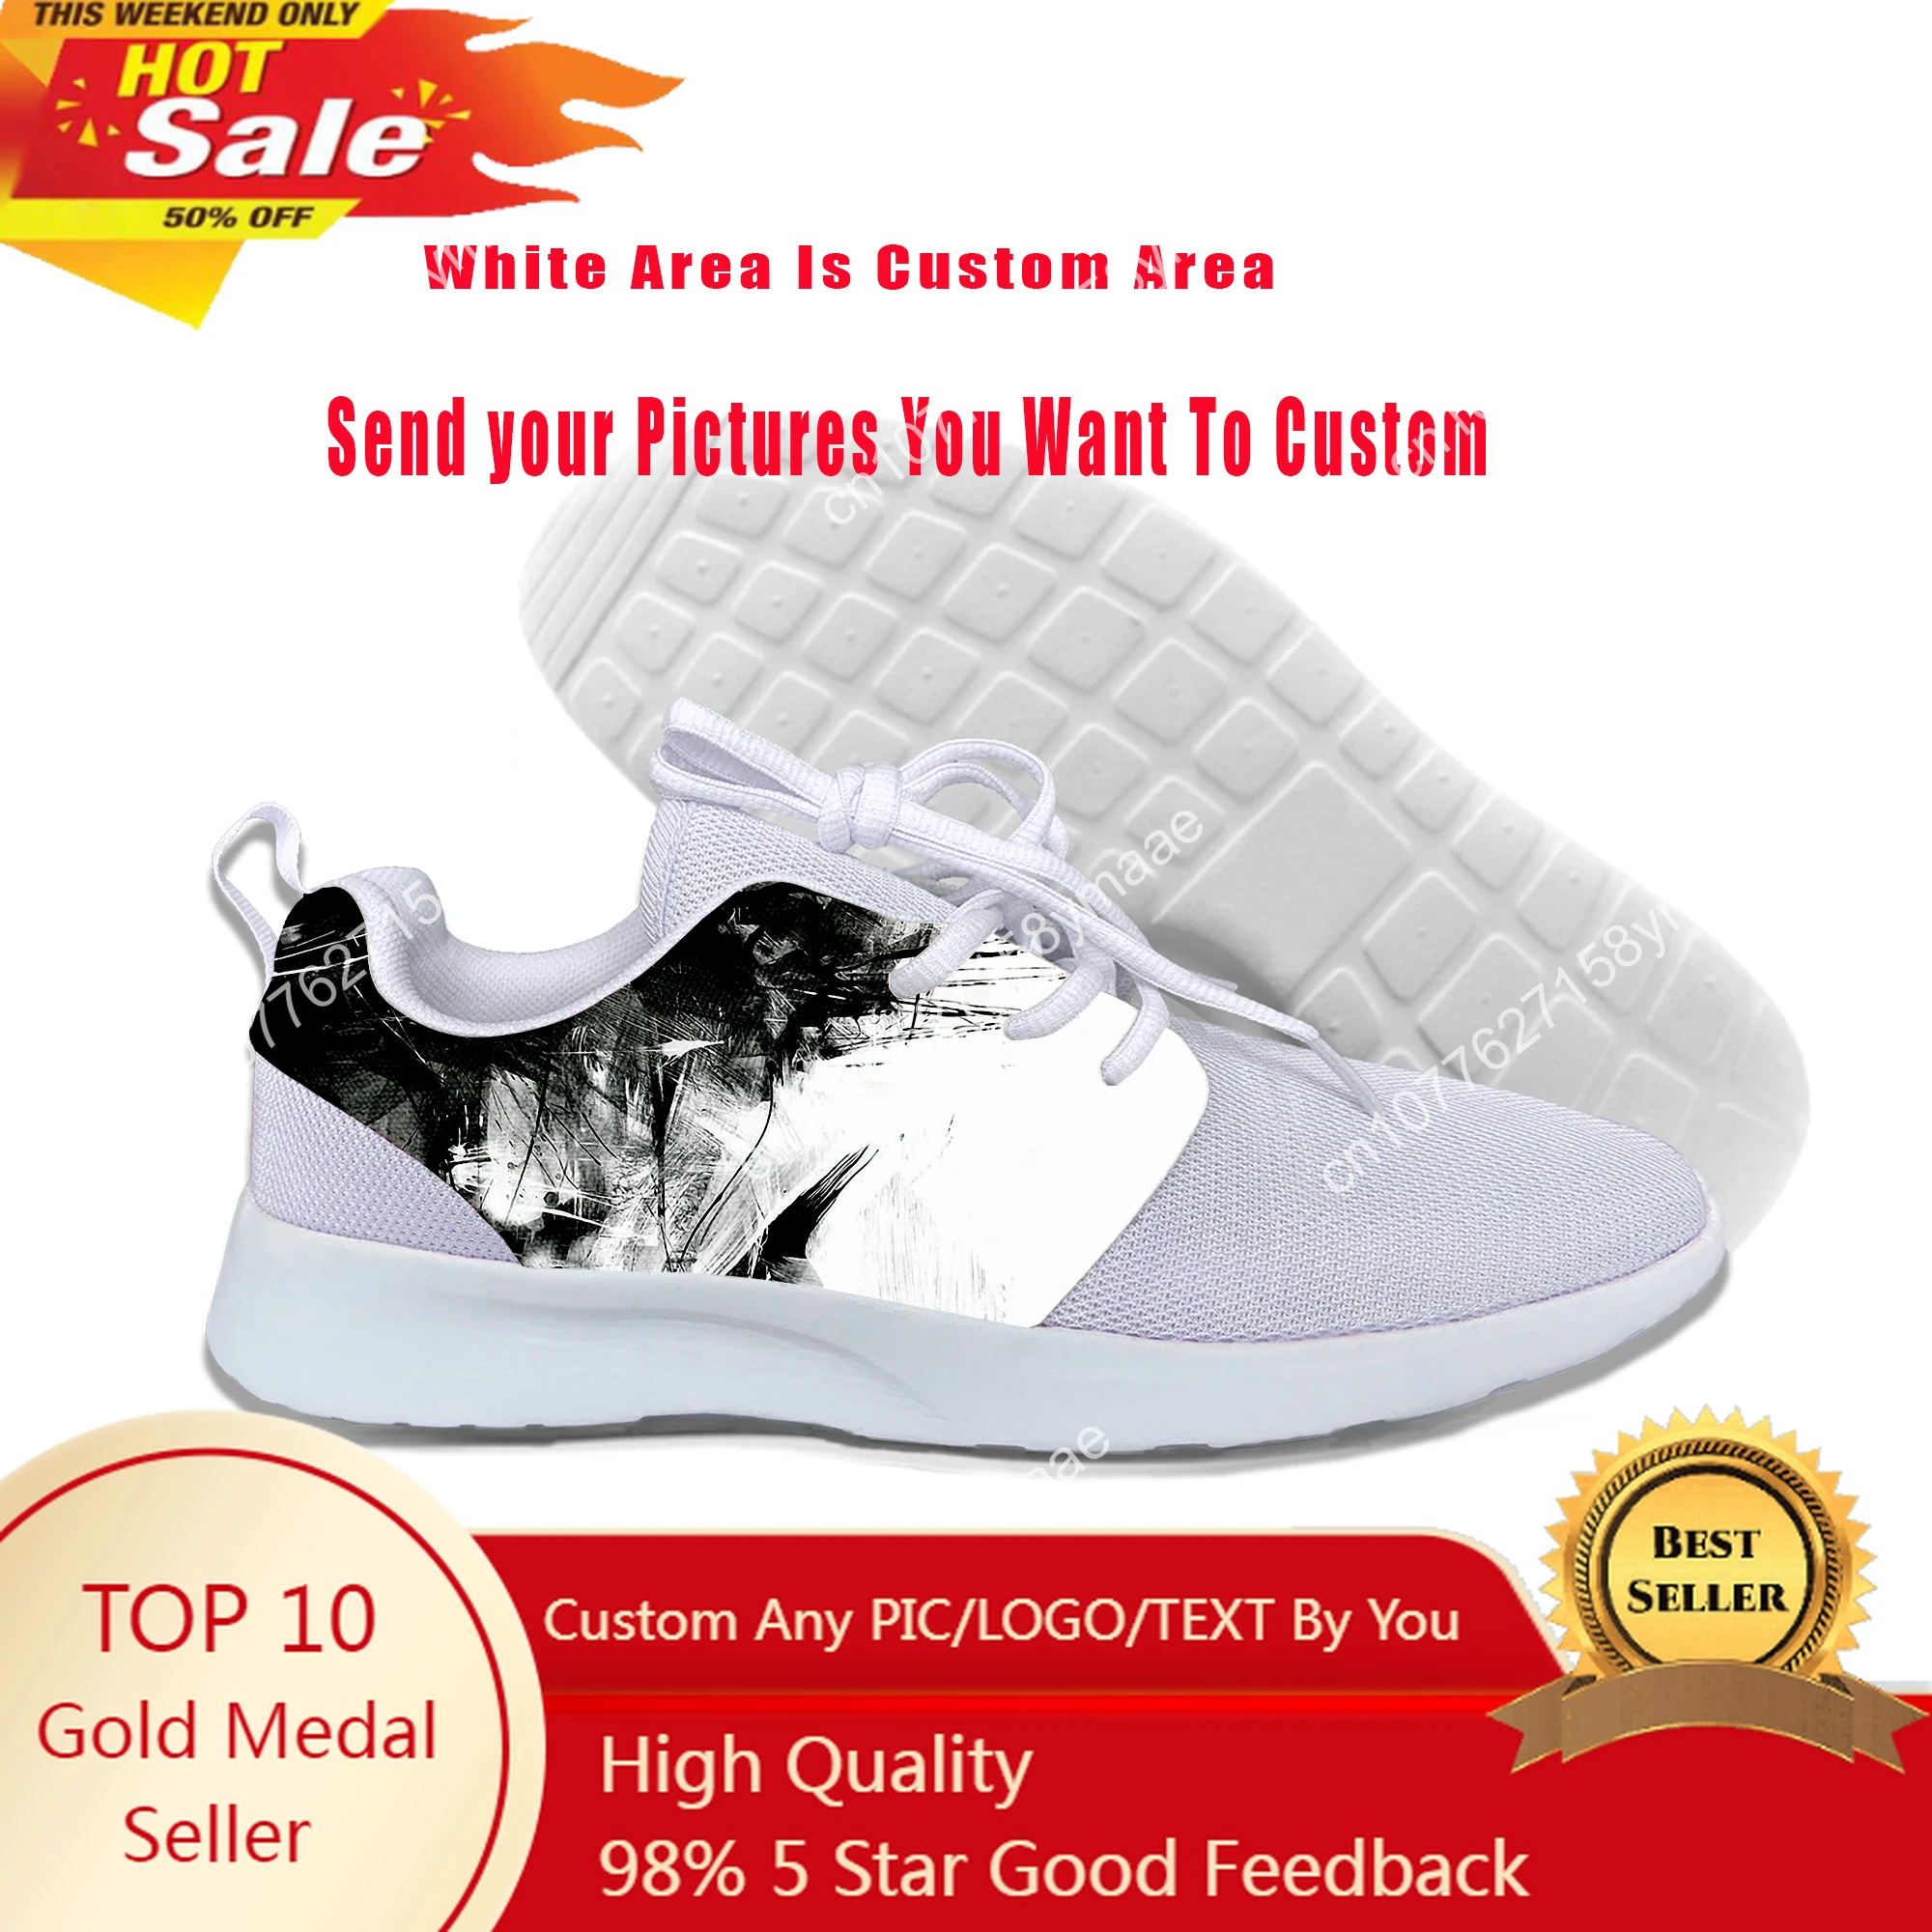 Hot Cool Splashed Paint Casual Shoes Summer Shoes Men Short Printed 3D Sneakers Lightweight Running Shoes Classic Sports Shoes